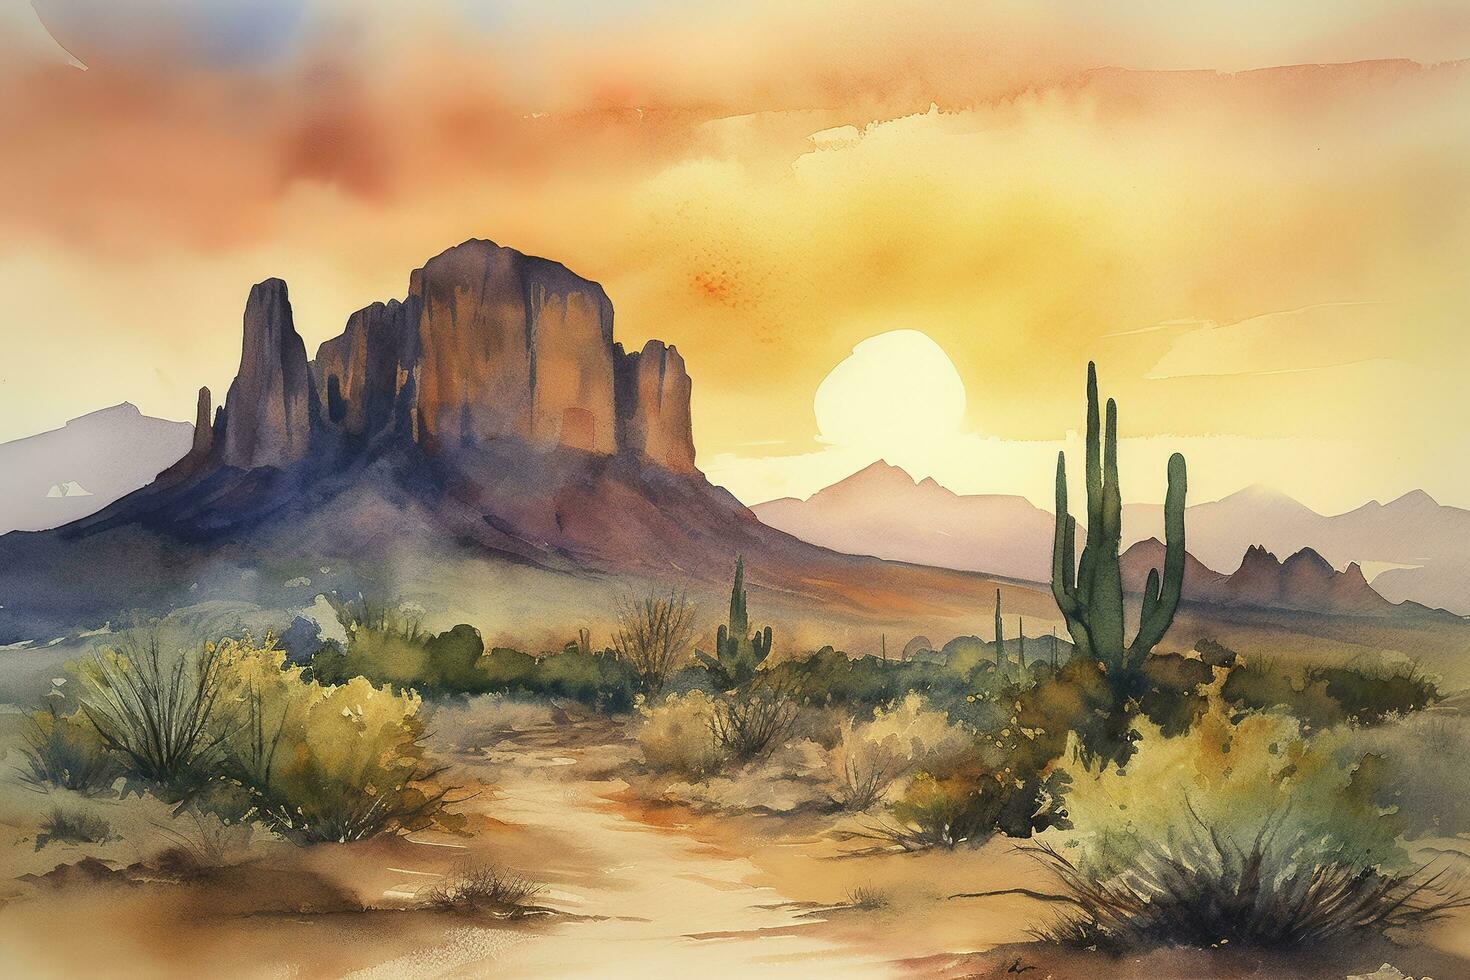 Paint a watercolor landscape of a desert scene with towering rock formations, intricate cacti, and a dramatic sunset sky, generate ai photo